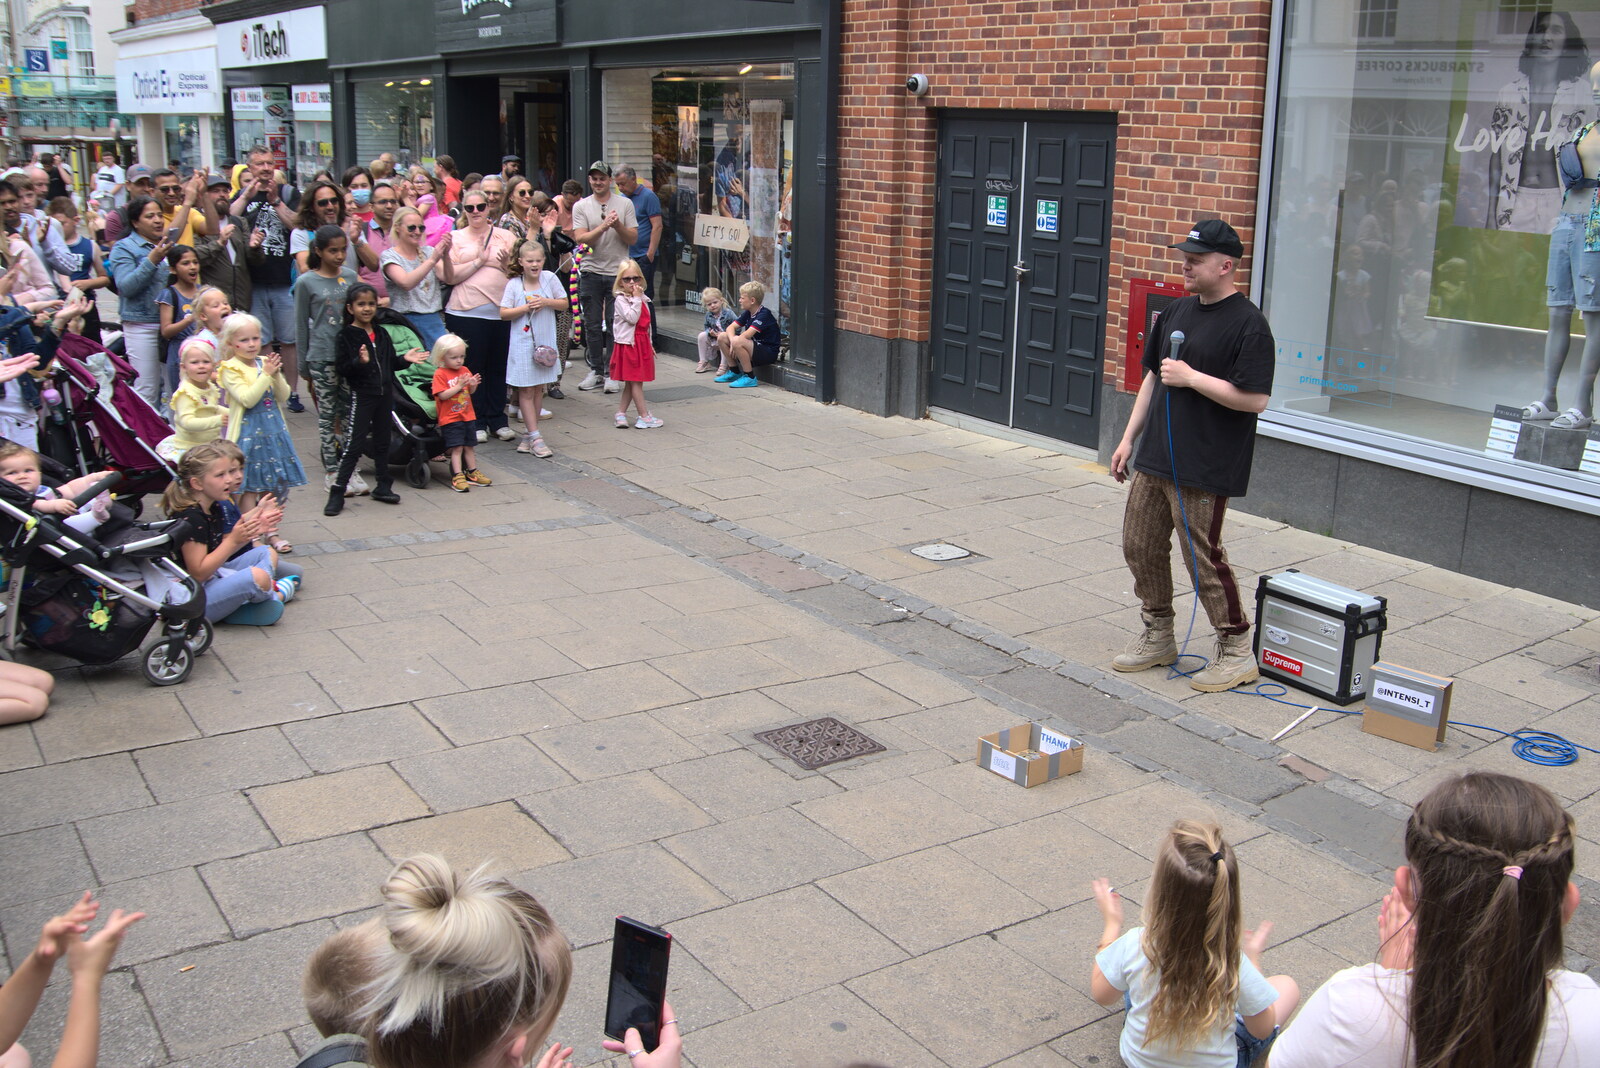 Beat Boxing on Gentleman's Walk from The Lord Mayor's Procession, Norwich, Norfolk - 2nd July 2022